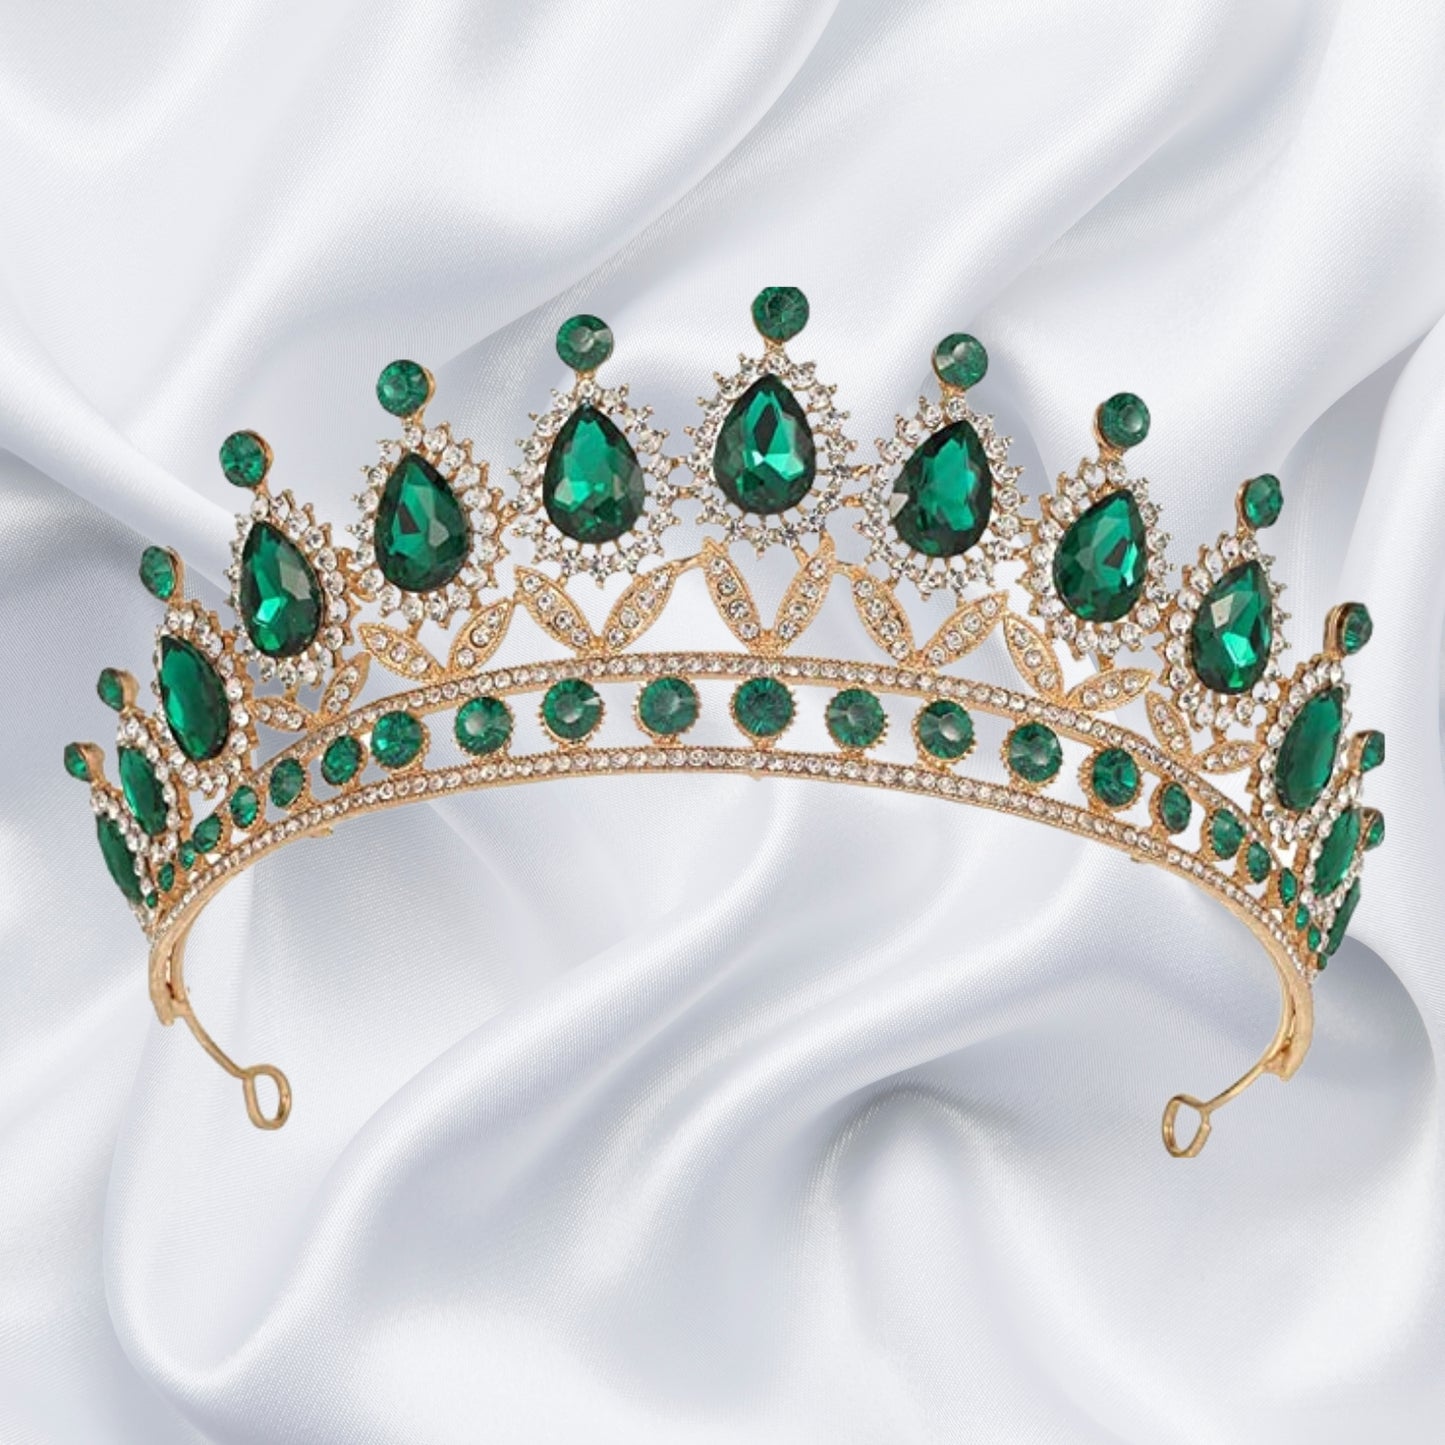 Green Vintage Crown and Tiara for Women, Princess Crown Queen Tiara Crystal Rhinestone Hair Accessories for Girls Bridal Bride, Wedding Prom Birthday Prom Costume Festival Party